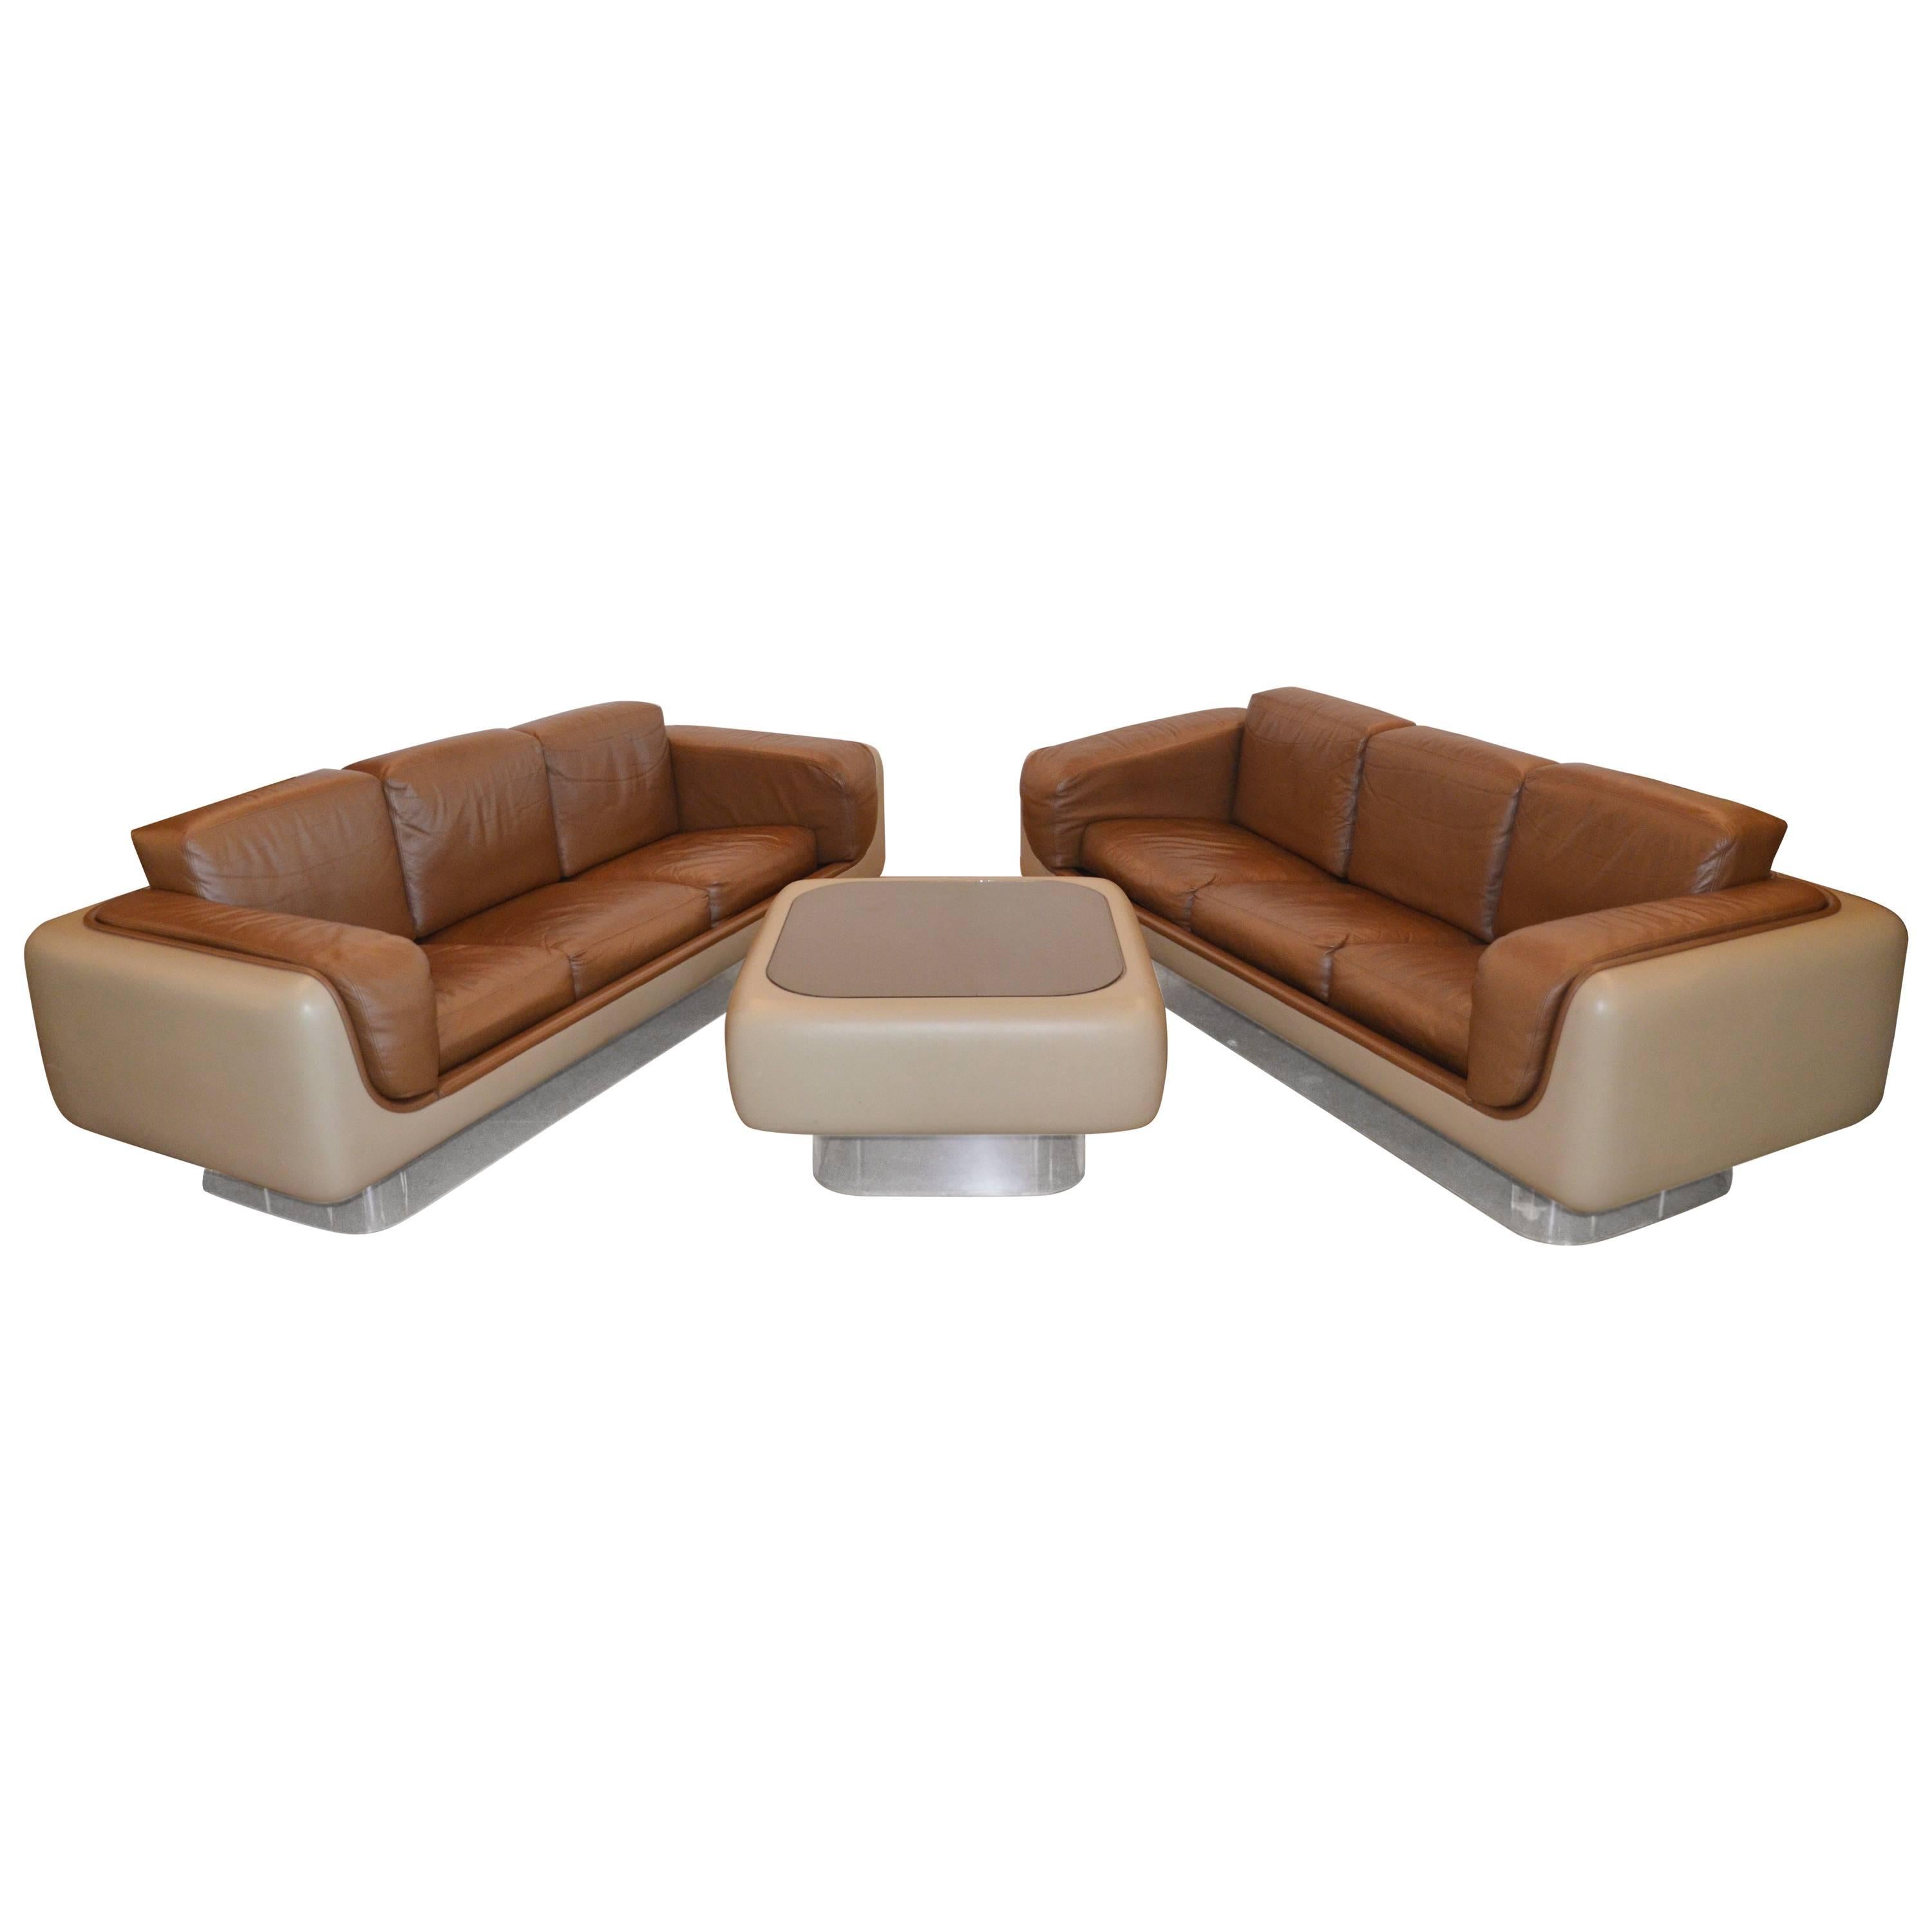 William Andrus Sofas and Table Set of Lucite, Leather and Fiberglass, 1970s